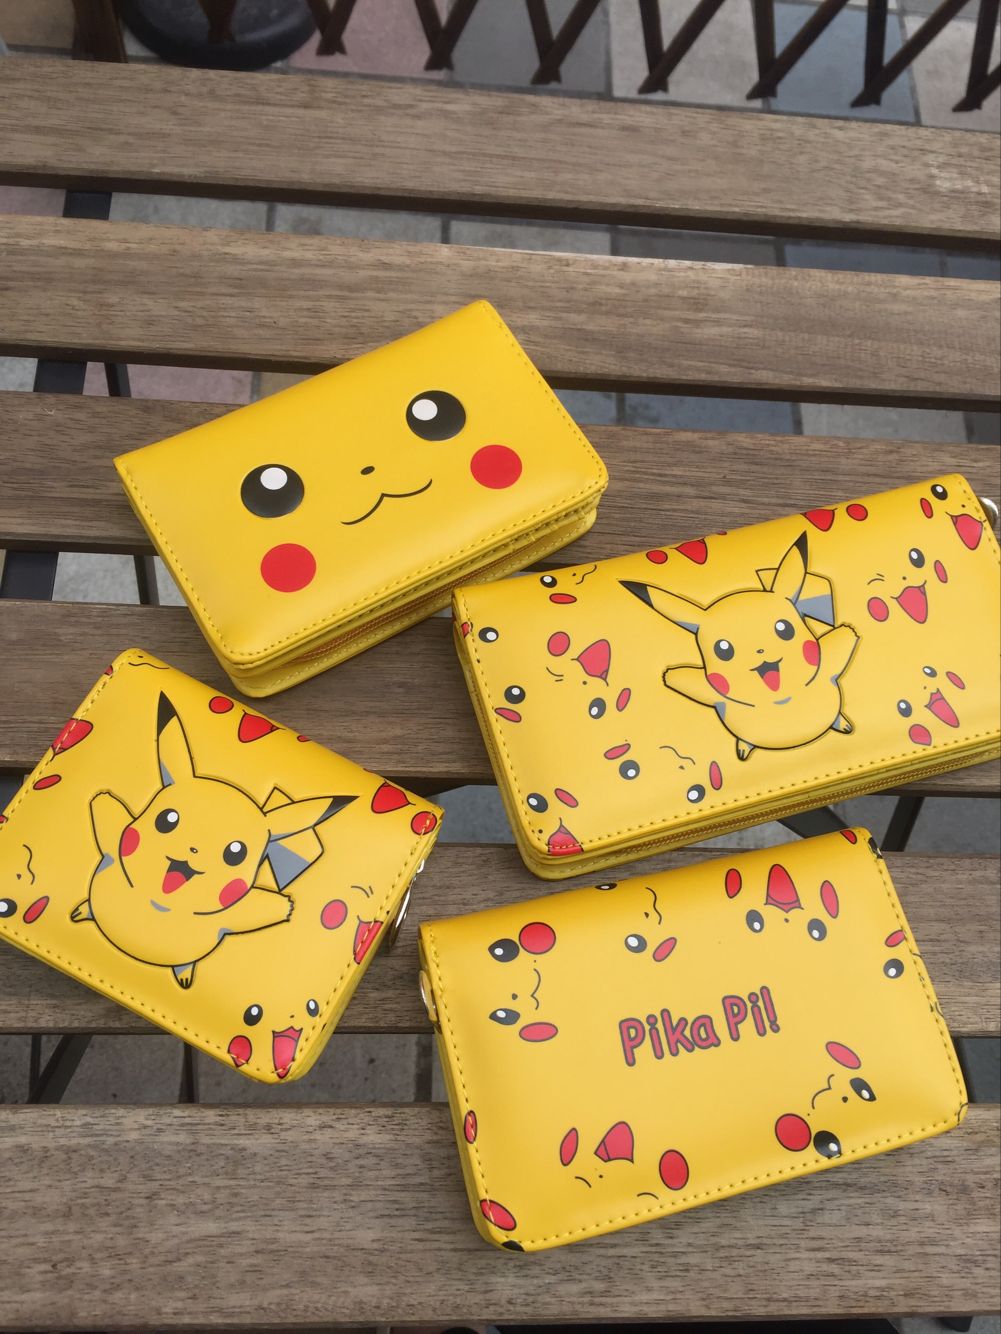 Primary and secondary school students short cartoon wallet men and women anime children cute Pikachu tide leather clip coin purse free shipping